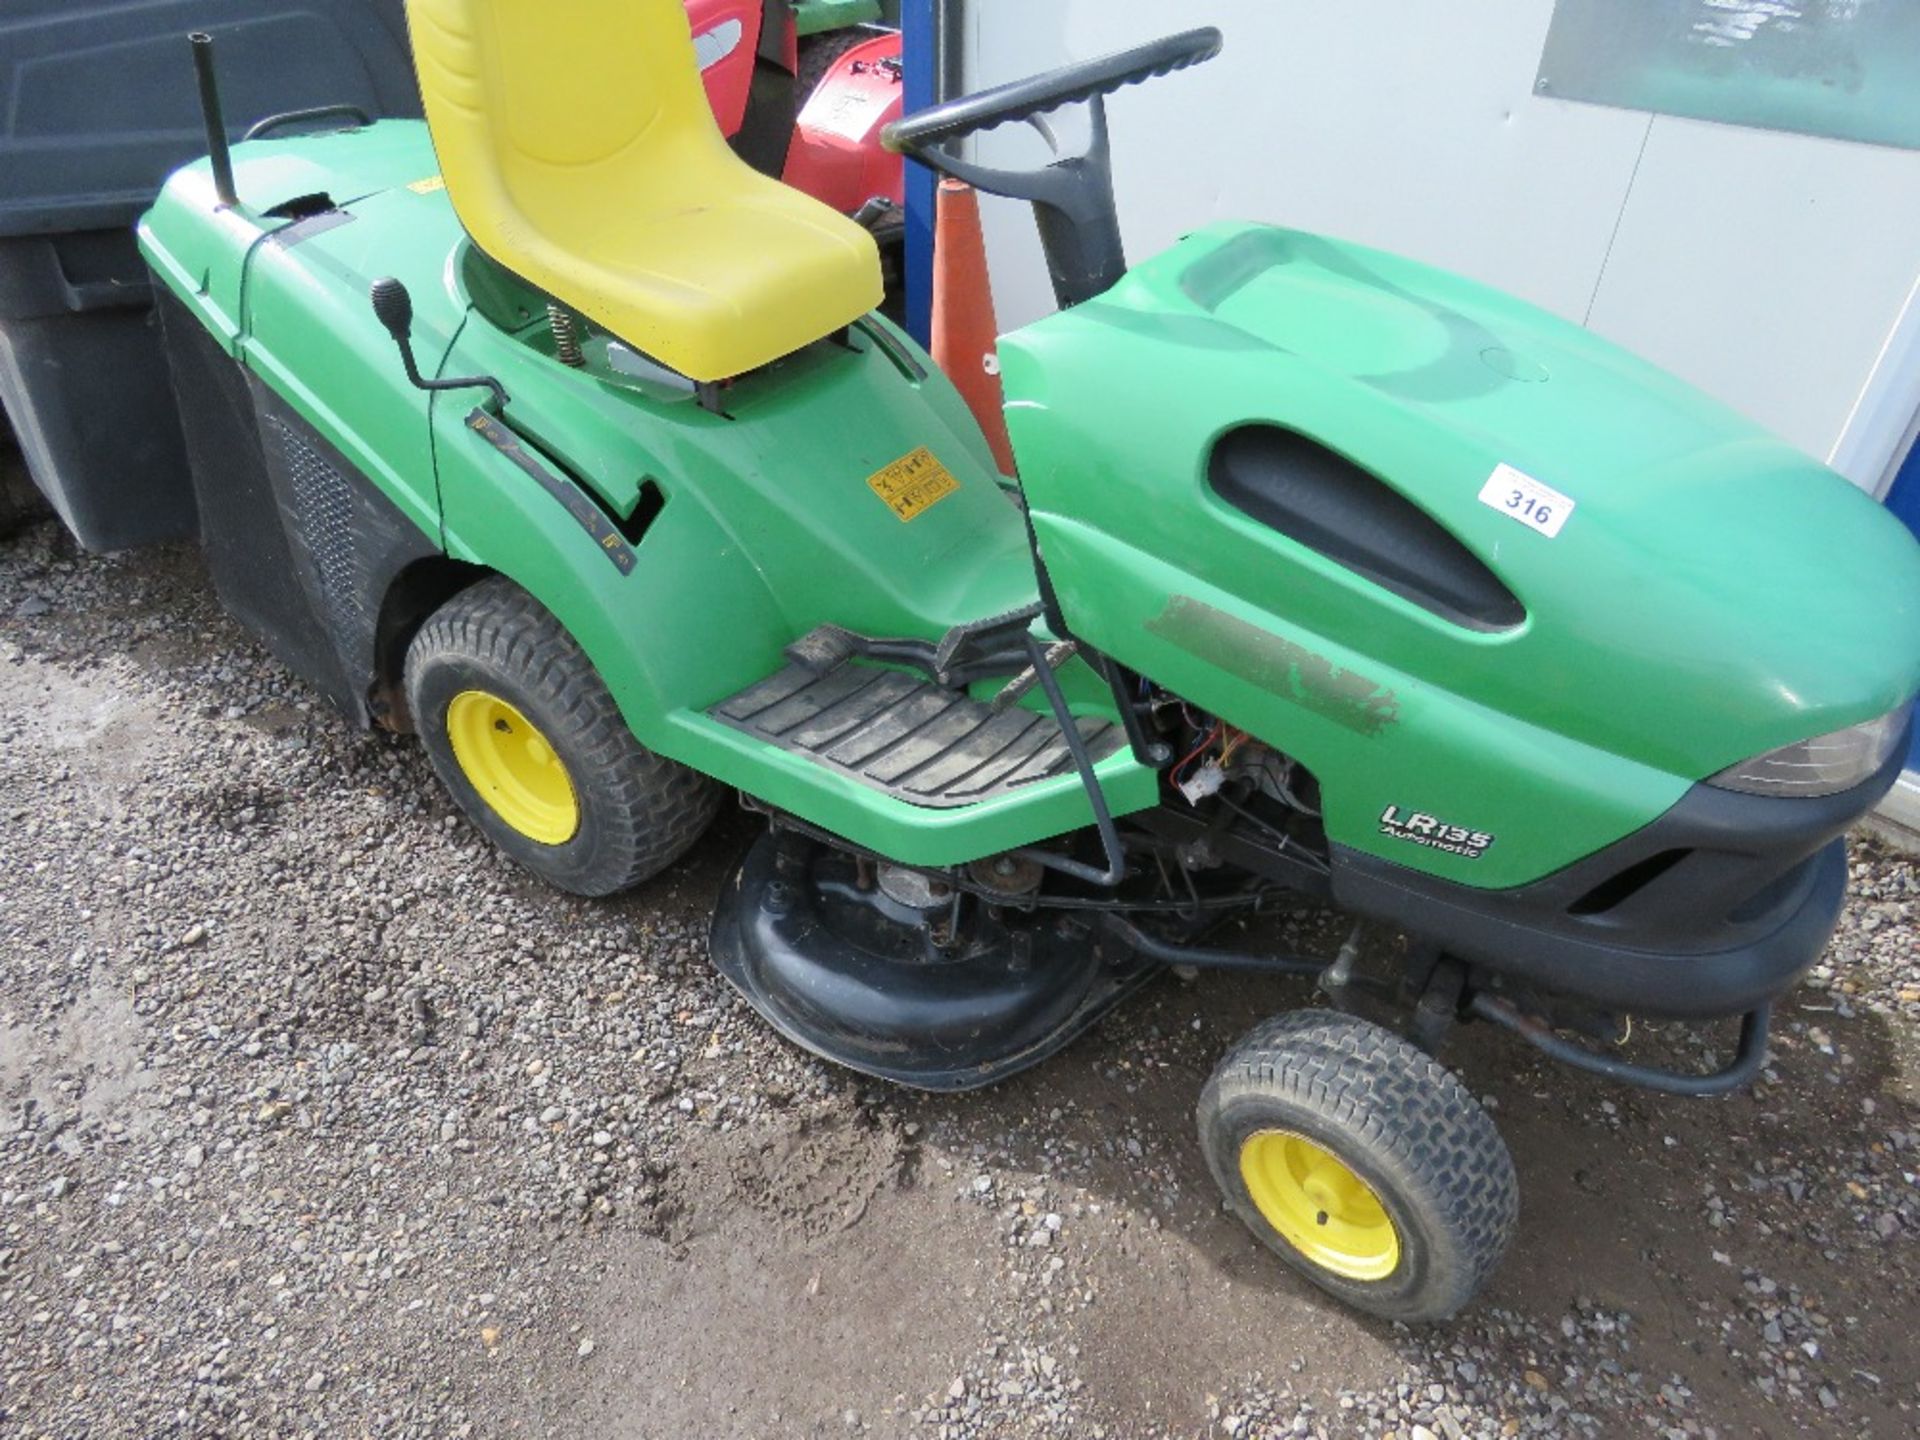 JOHN DEERE LR135 PETROL ENGINED HYDRO RIDE ON MOWER WITH COLLECTOR. WHEN TESTED WAS SEEN TO START AN